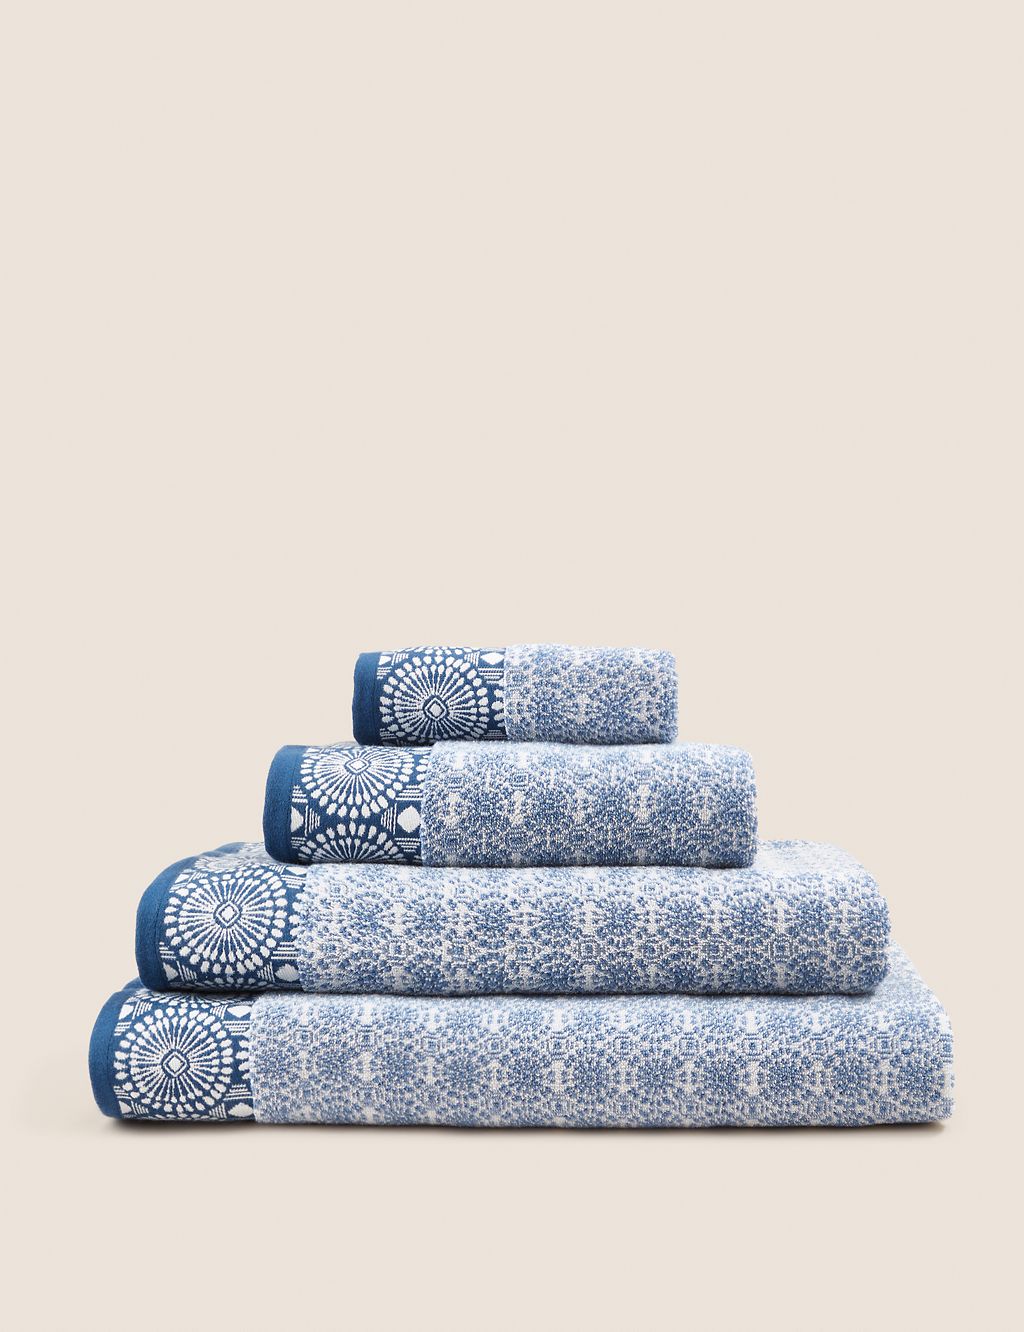 Seville Sidonia Pure Cotton Towel 2 of 7